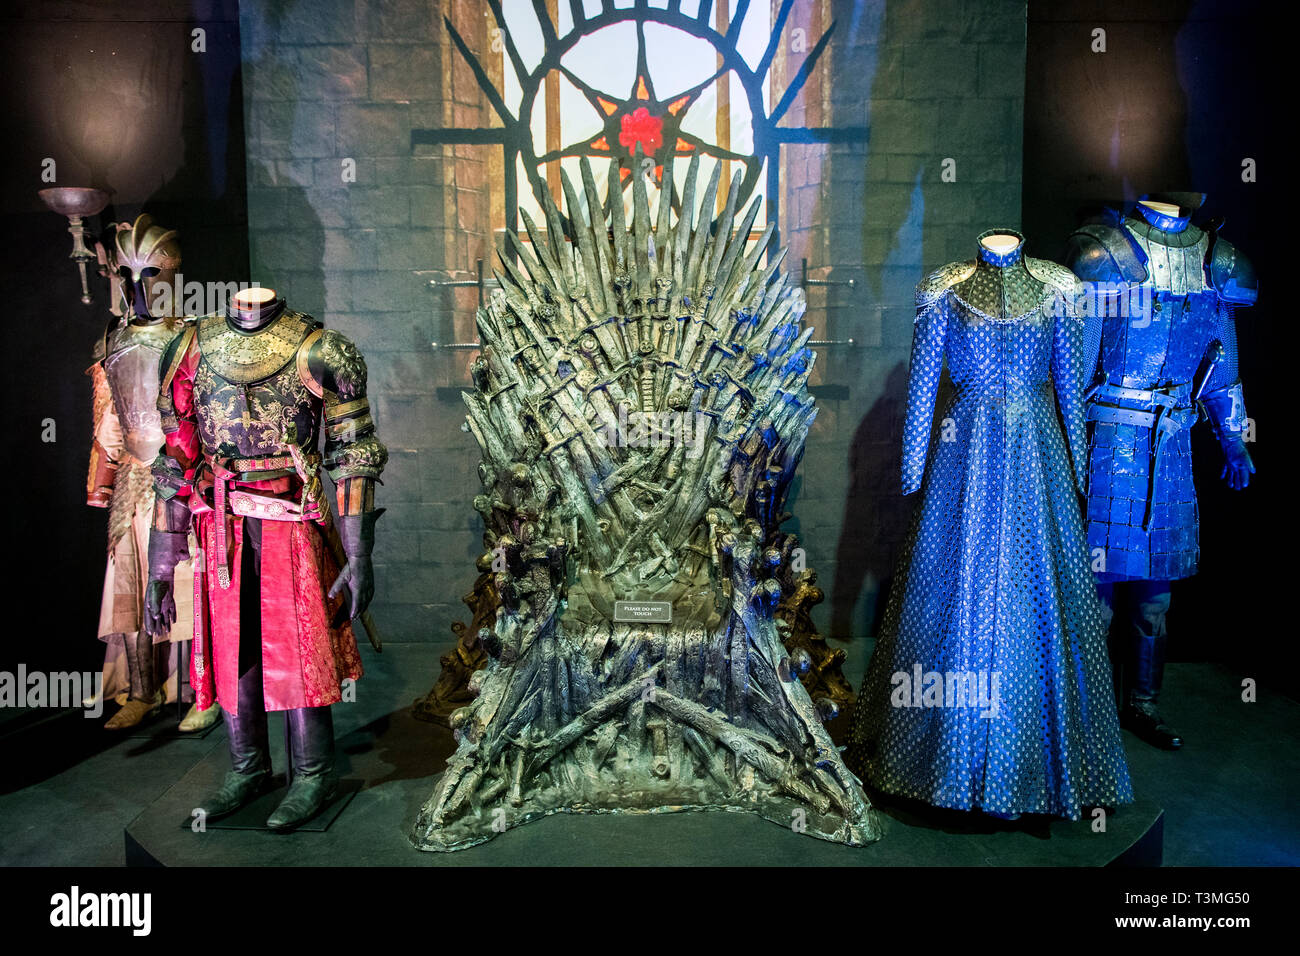 Lef to right; armour worn by Meryn Trant, played by Ian Beattie, a costume worn by Joffrey Baratheon, played by Jack Gleeson, a leather dress worn by Cersei Lannister, played by Lena Headey, and the armour worn by Gregor ???The Mountain??? Clegane, played by Conan Stevens, on display in The Great Hall at the launch of the Game of Thrones touring exhibition at the Titanic Exhibition Centre in Belfast. Stock Photo